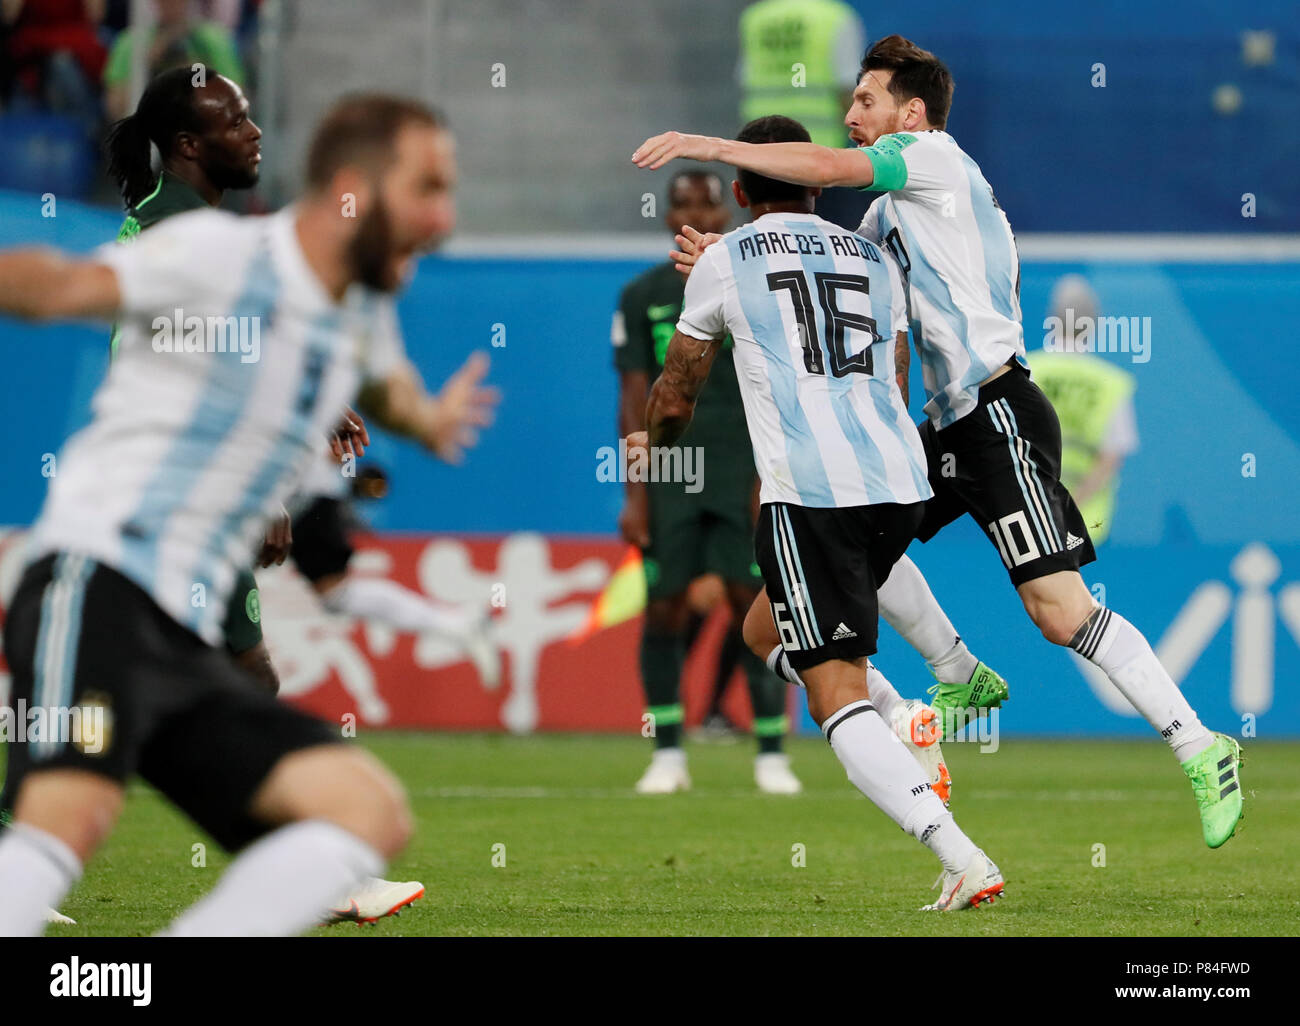 SAINT PETERSBURG, RUSSIA - JUNE 26: Marcos Rojo (C) of Argentina national team celebrates his goal with Lionel Messi (R) during the 2018 FIFA World Cup Russia group D match between Nigeria and Argentina at Saint Petersburg Stadium on June 26, 2018 in Saint Petersburg, Russia. (MB Media) Stock Photo